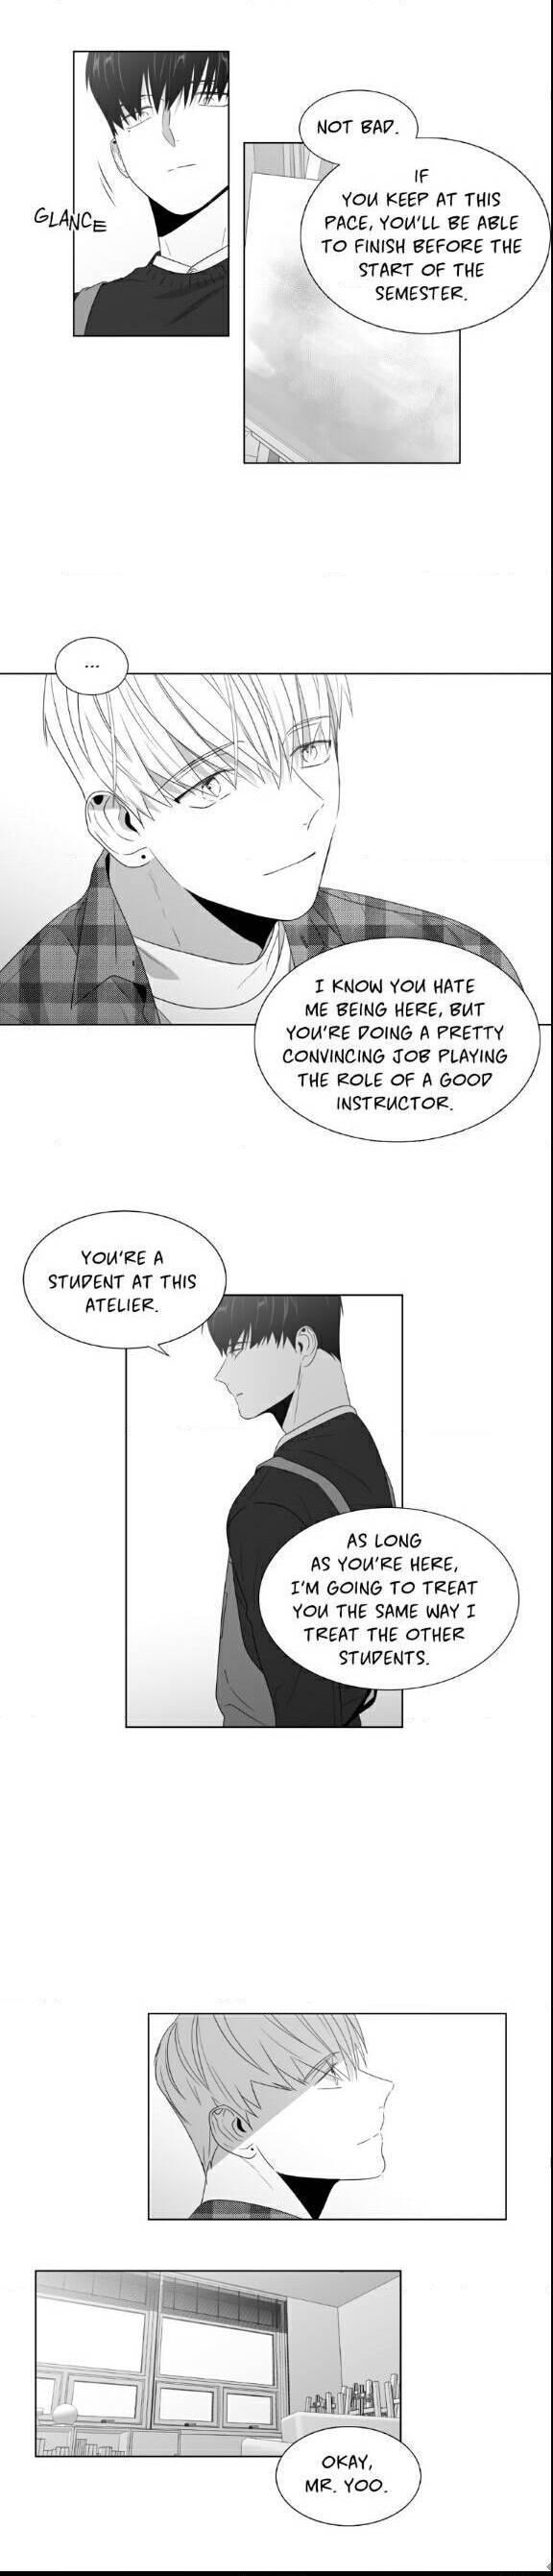 Lover Boy (Lezhin) Chapter 058 page 3